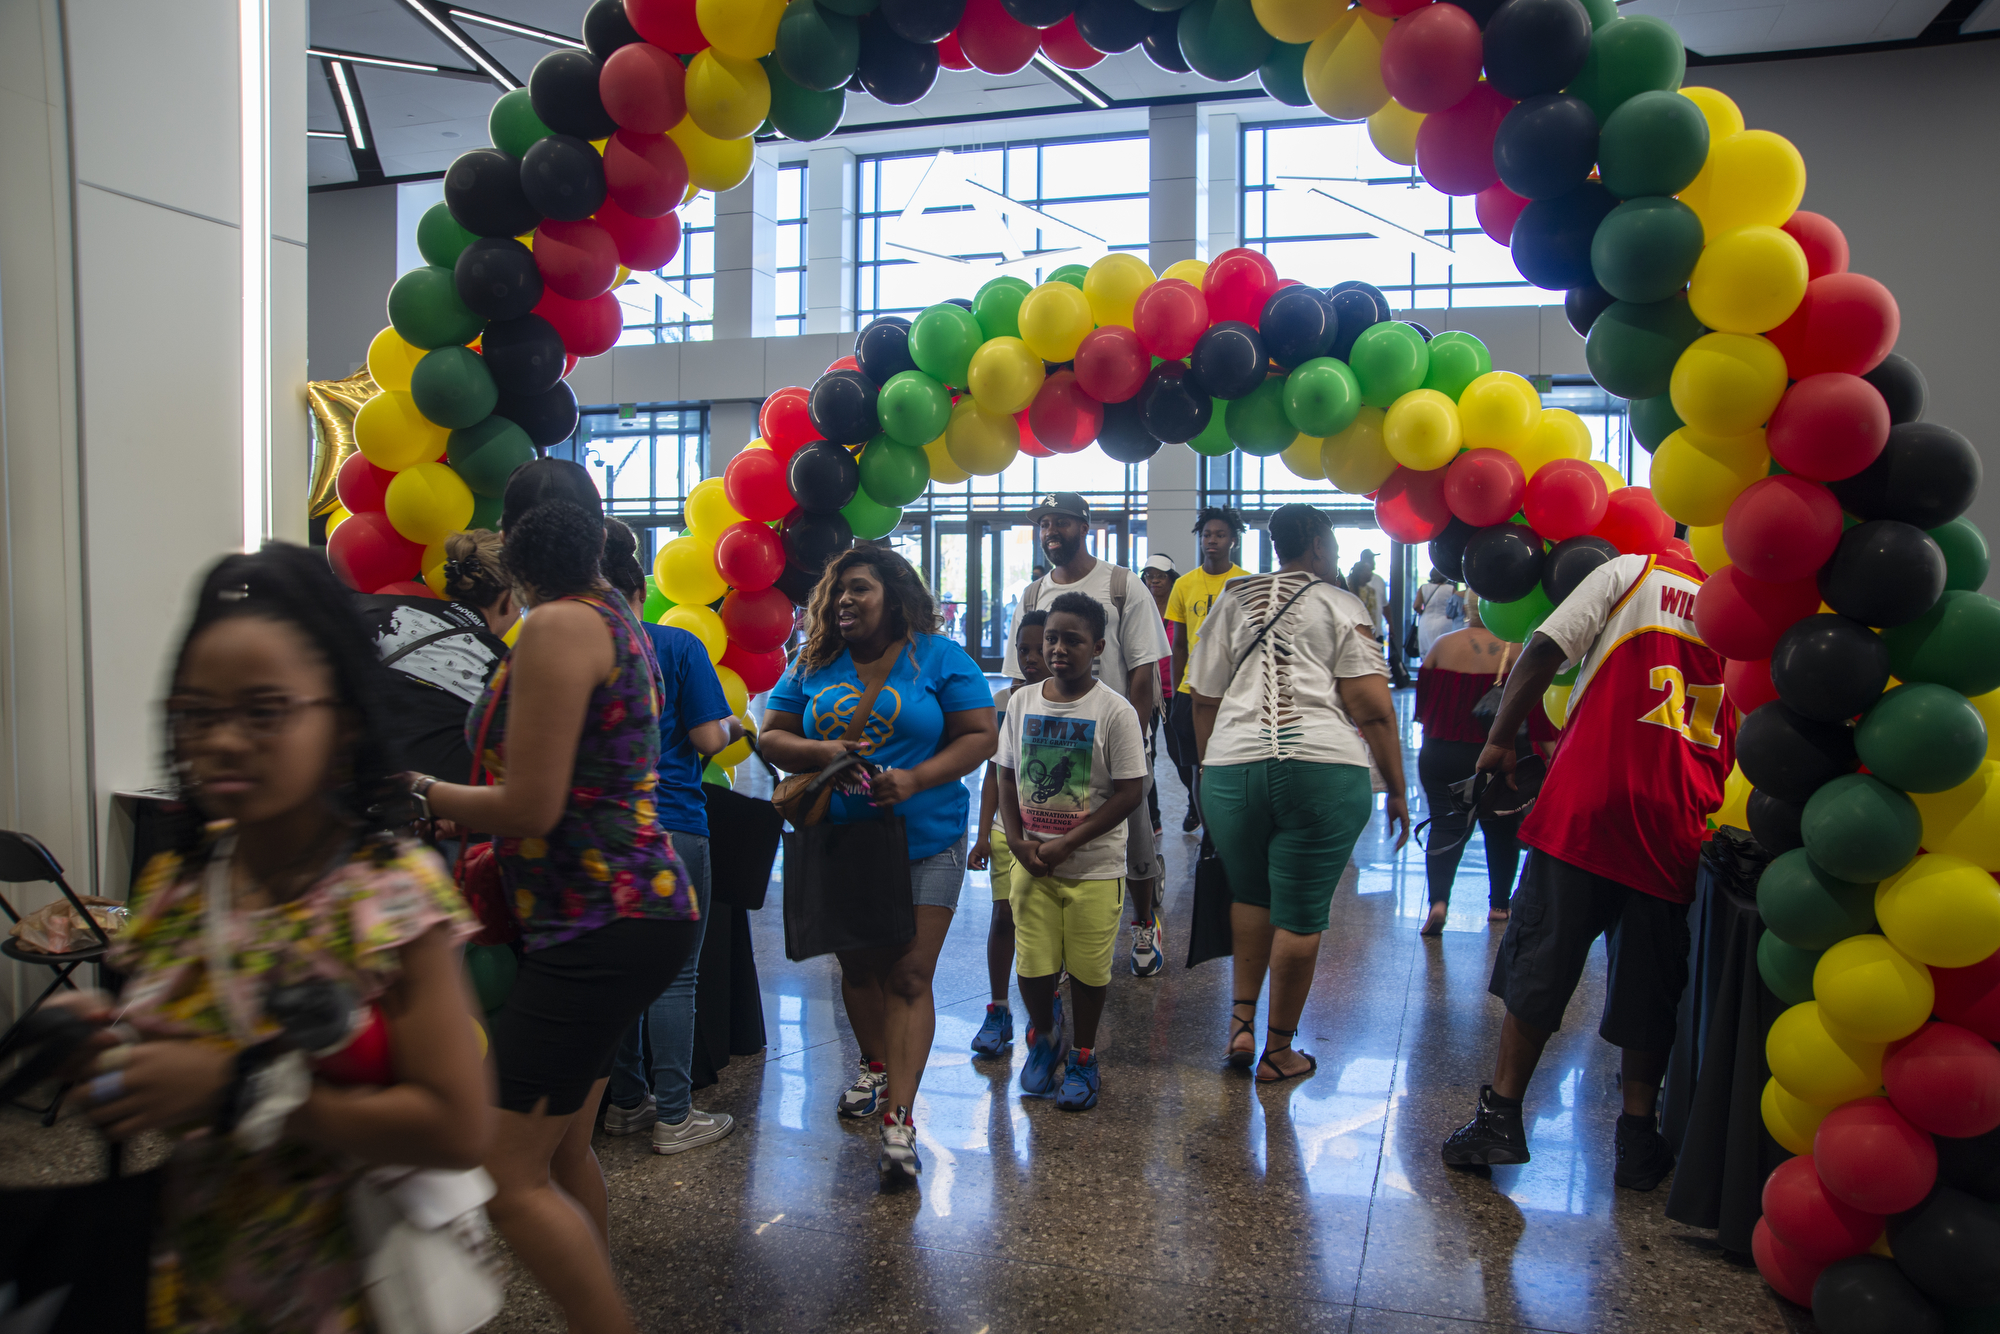 People arrive during a Juneteenth celebration at The Expo in Las Vegas on Saturday, June 18, 2022. (Daniel Clark/The Nevada Independent)